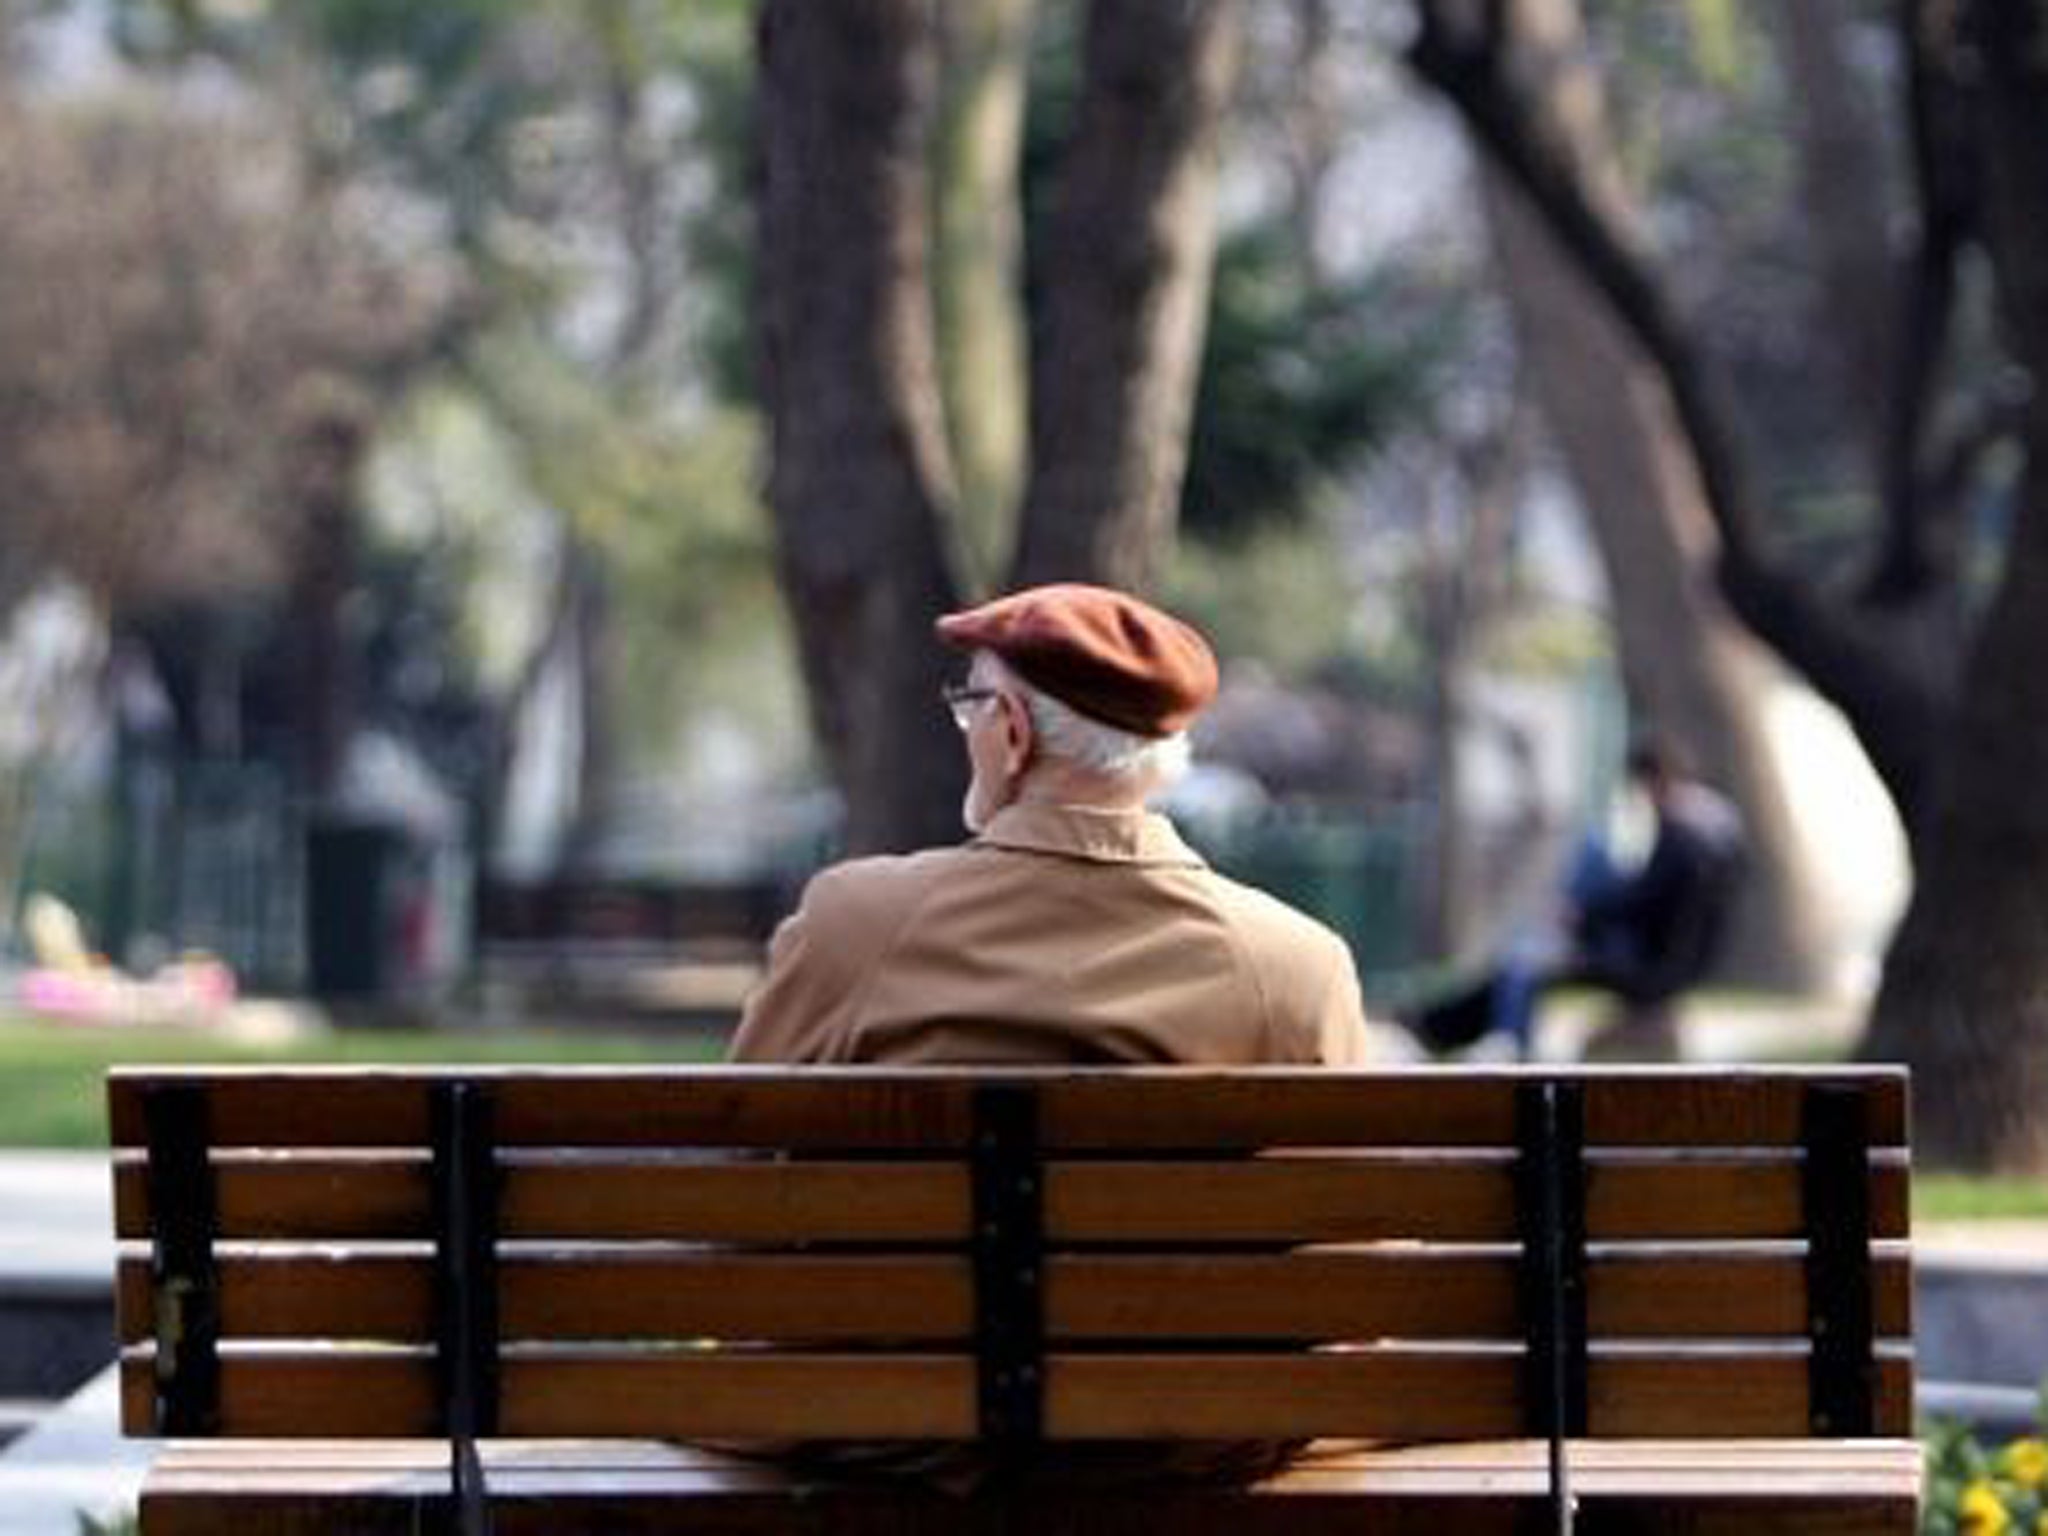 A Government review of pension drawdown rules could leave many retired people out of pocket